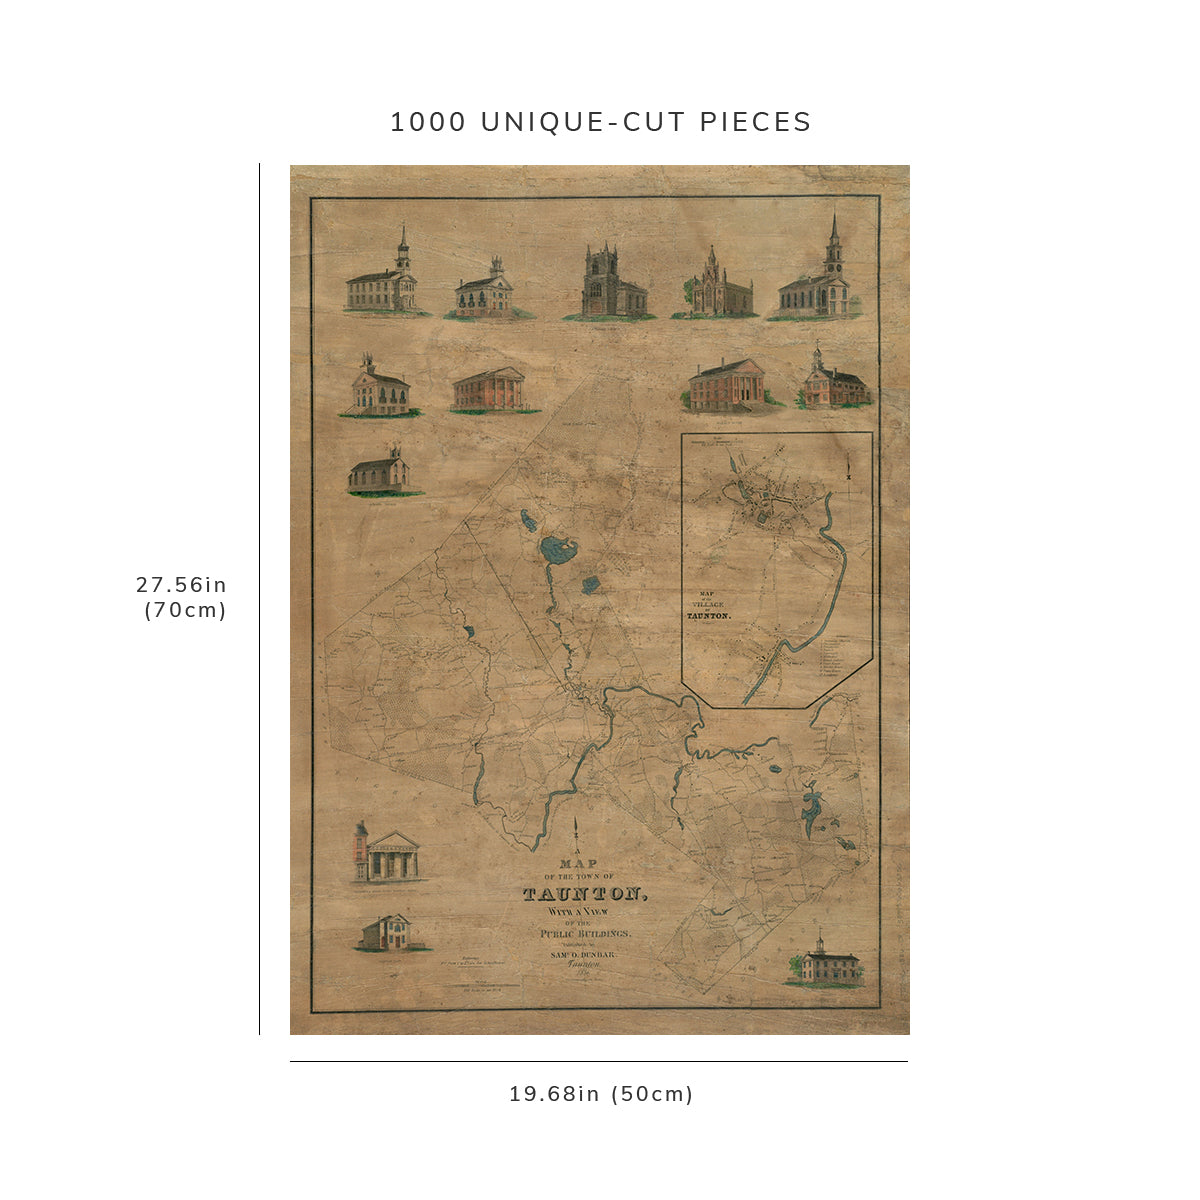 1000 Piece Jigsaw Puzzle: 1836 Map | Bristol | Taunton of the town of Taunton